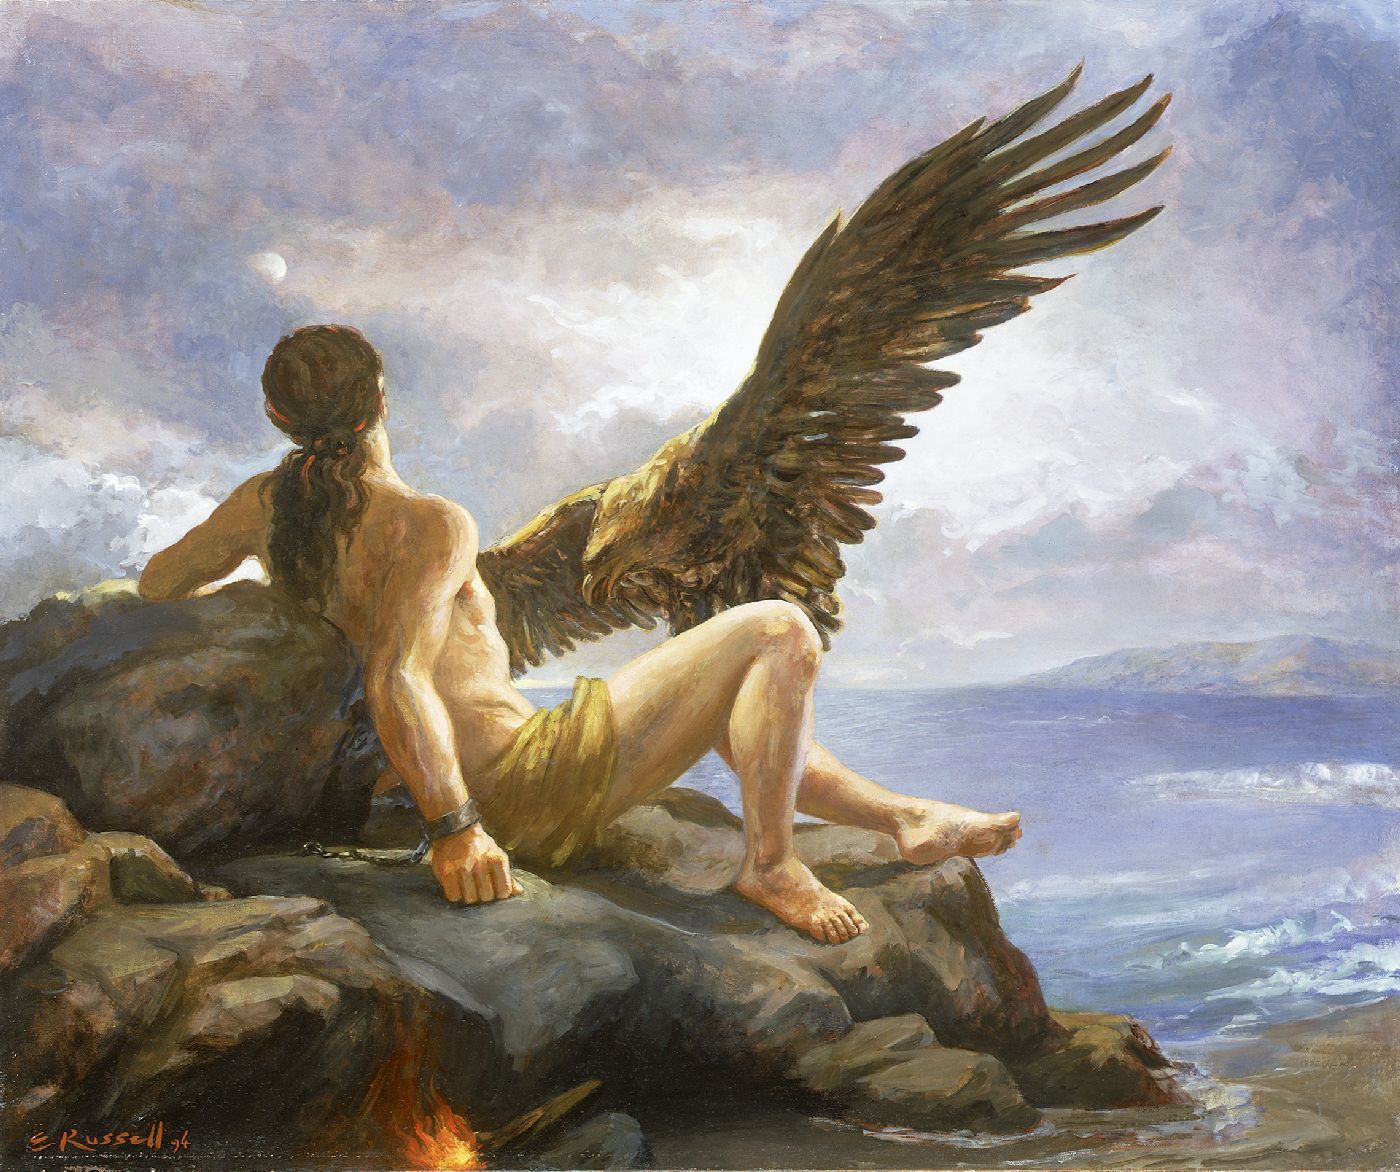 Prometheus' liver getting eaten by the eagle, by Elsie Russell